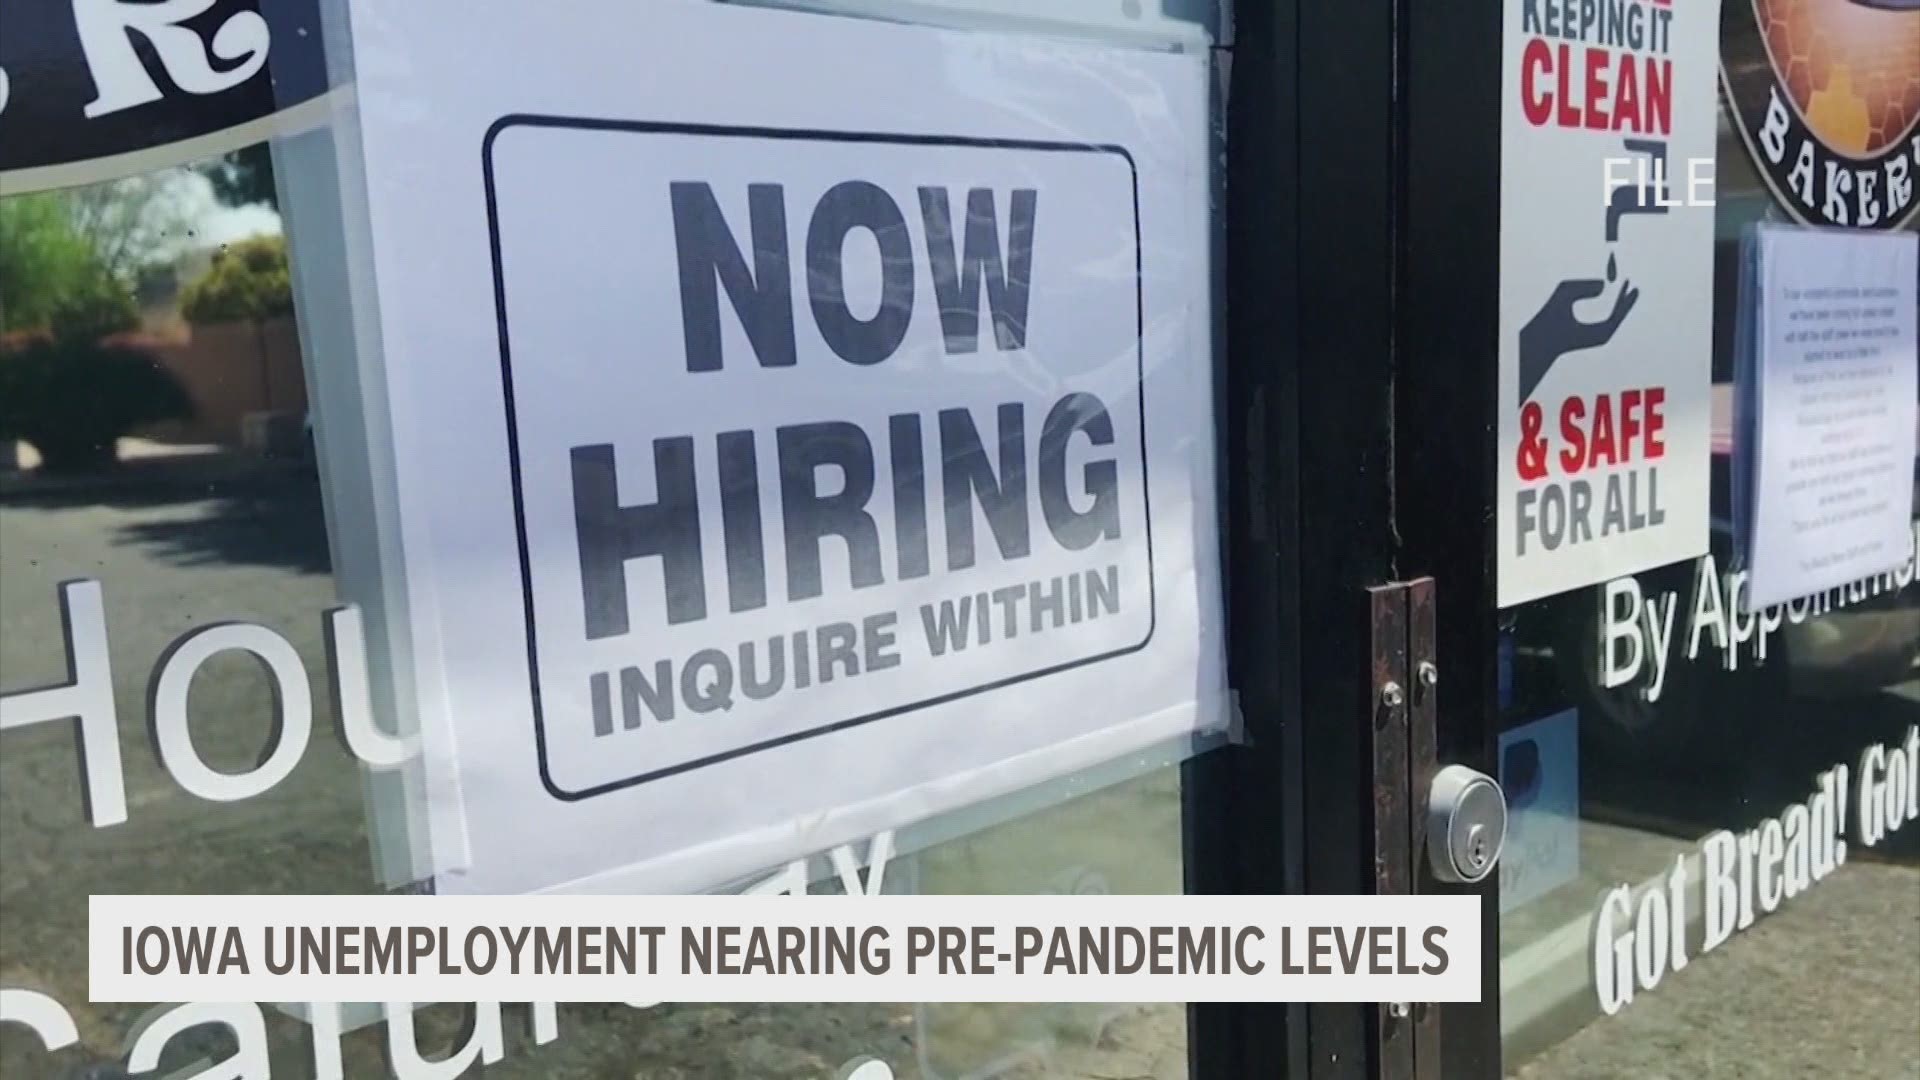 Iowa's unemployment rate hit an all-time high in April 2020 with more than 10% of Iowans without a job. Now, the rate sits just under 4%.